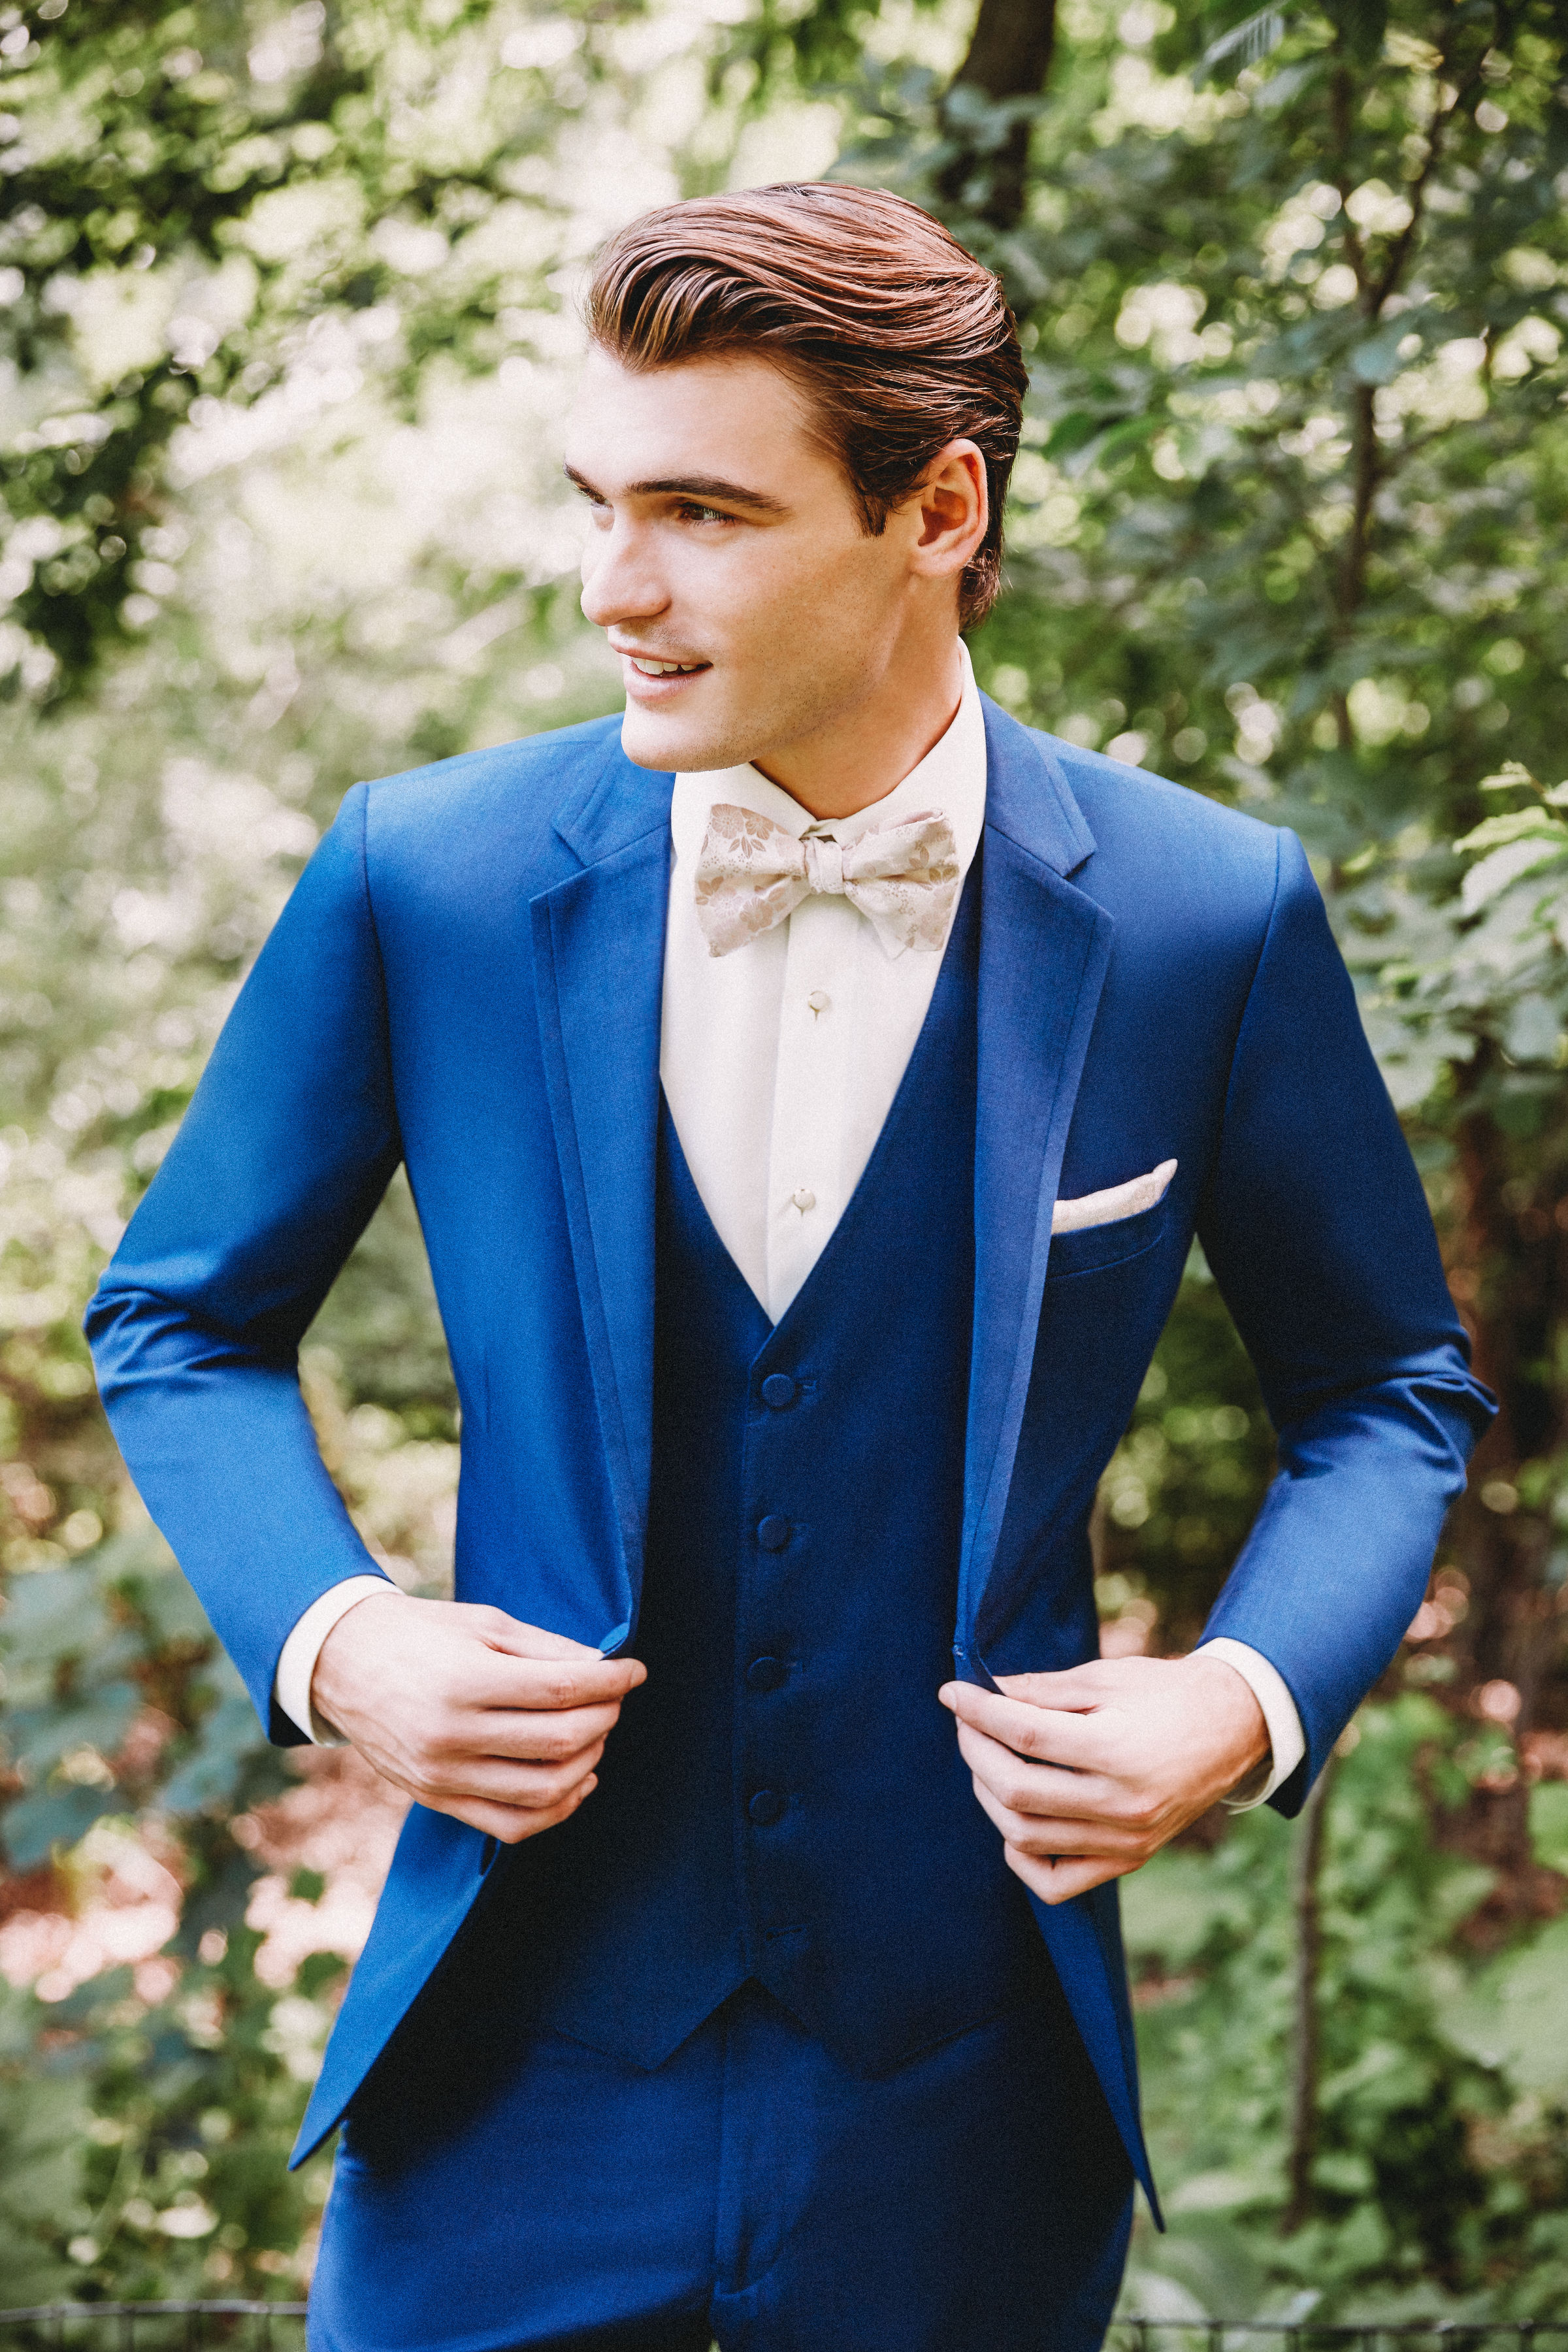 Mens Formal Wear Rentals Near Me : Prom Suits Near Me - Hardon Clothes ...